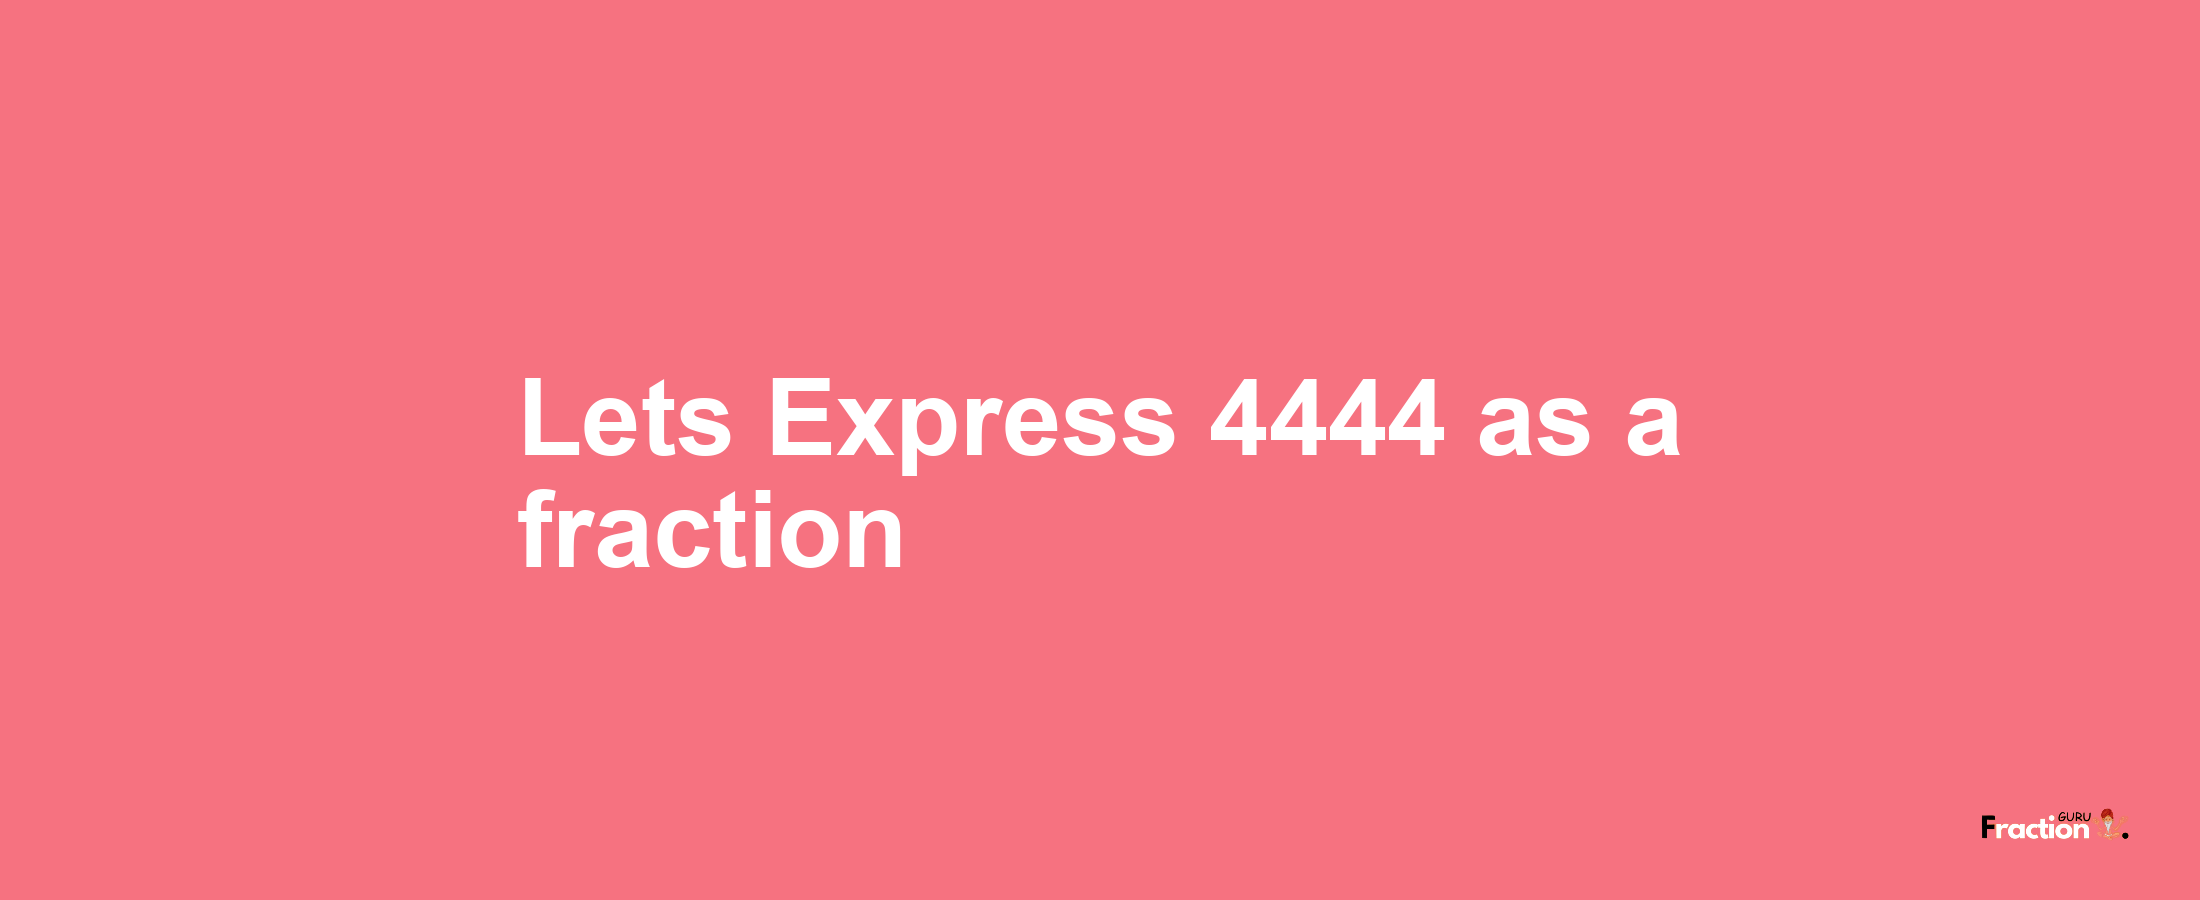 Lets Express 4444 as afraction